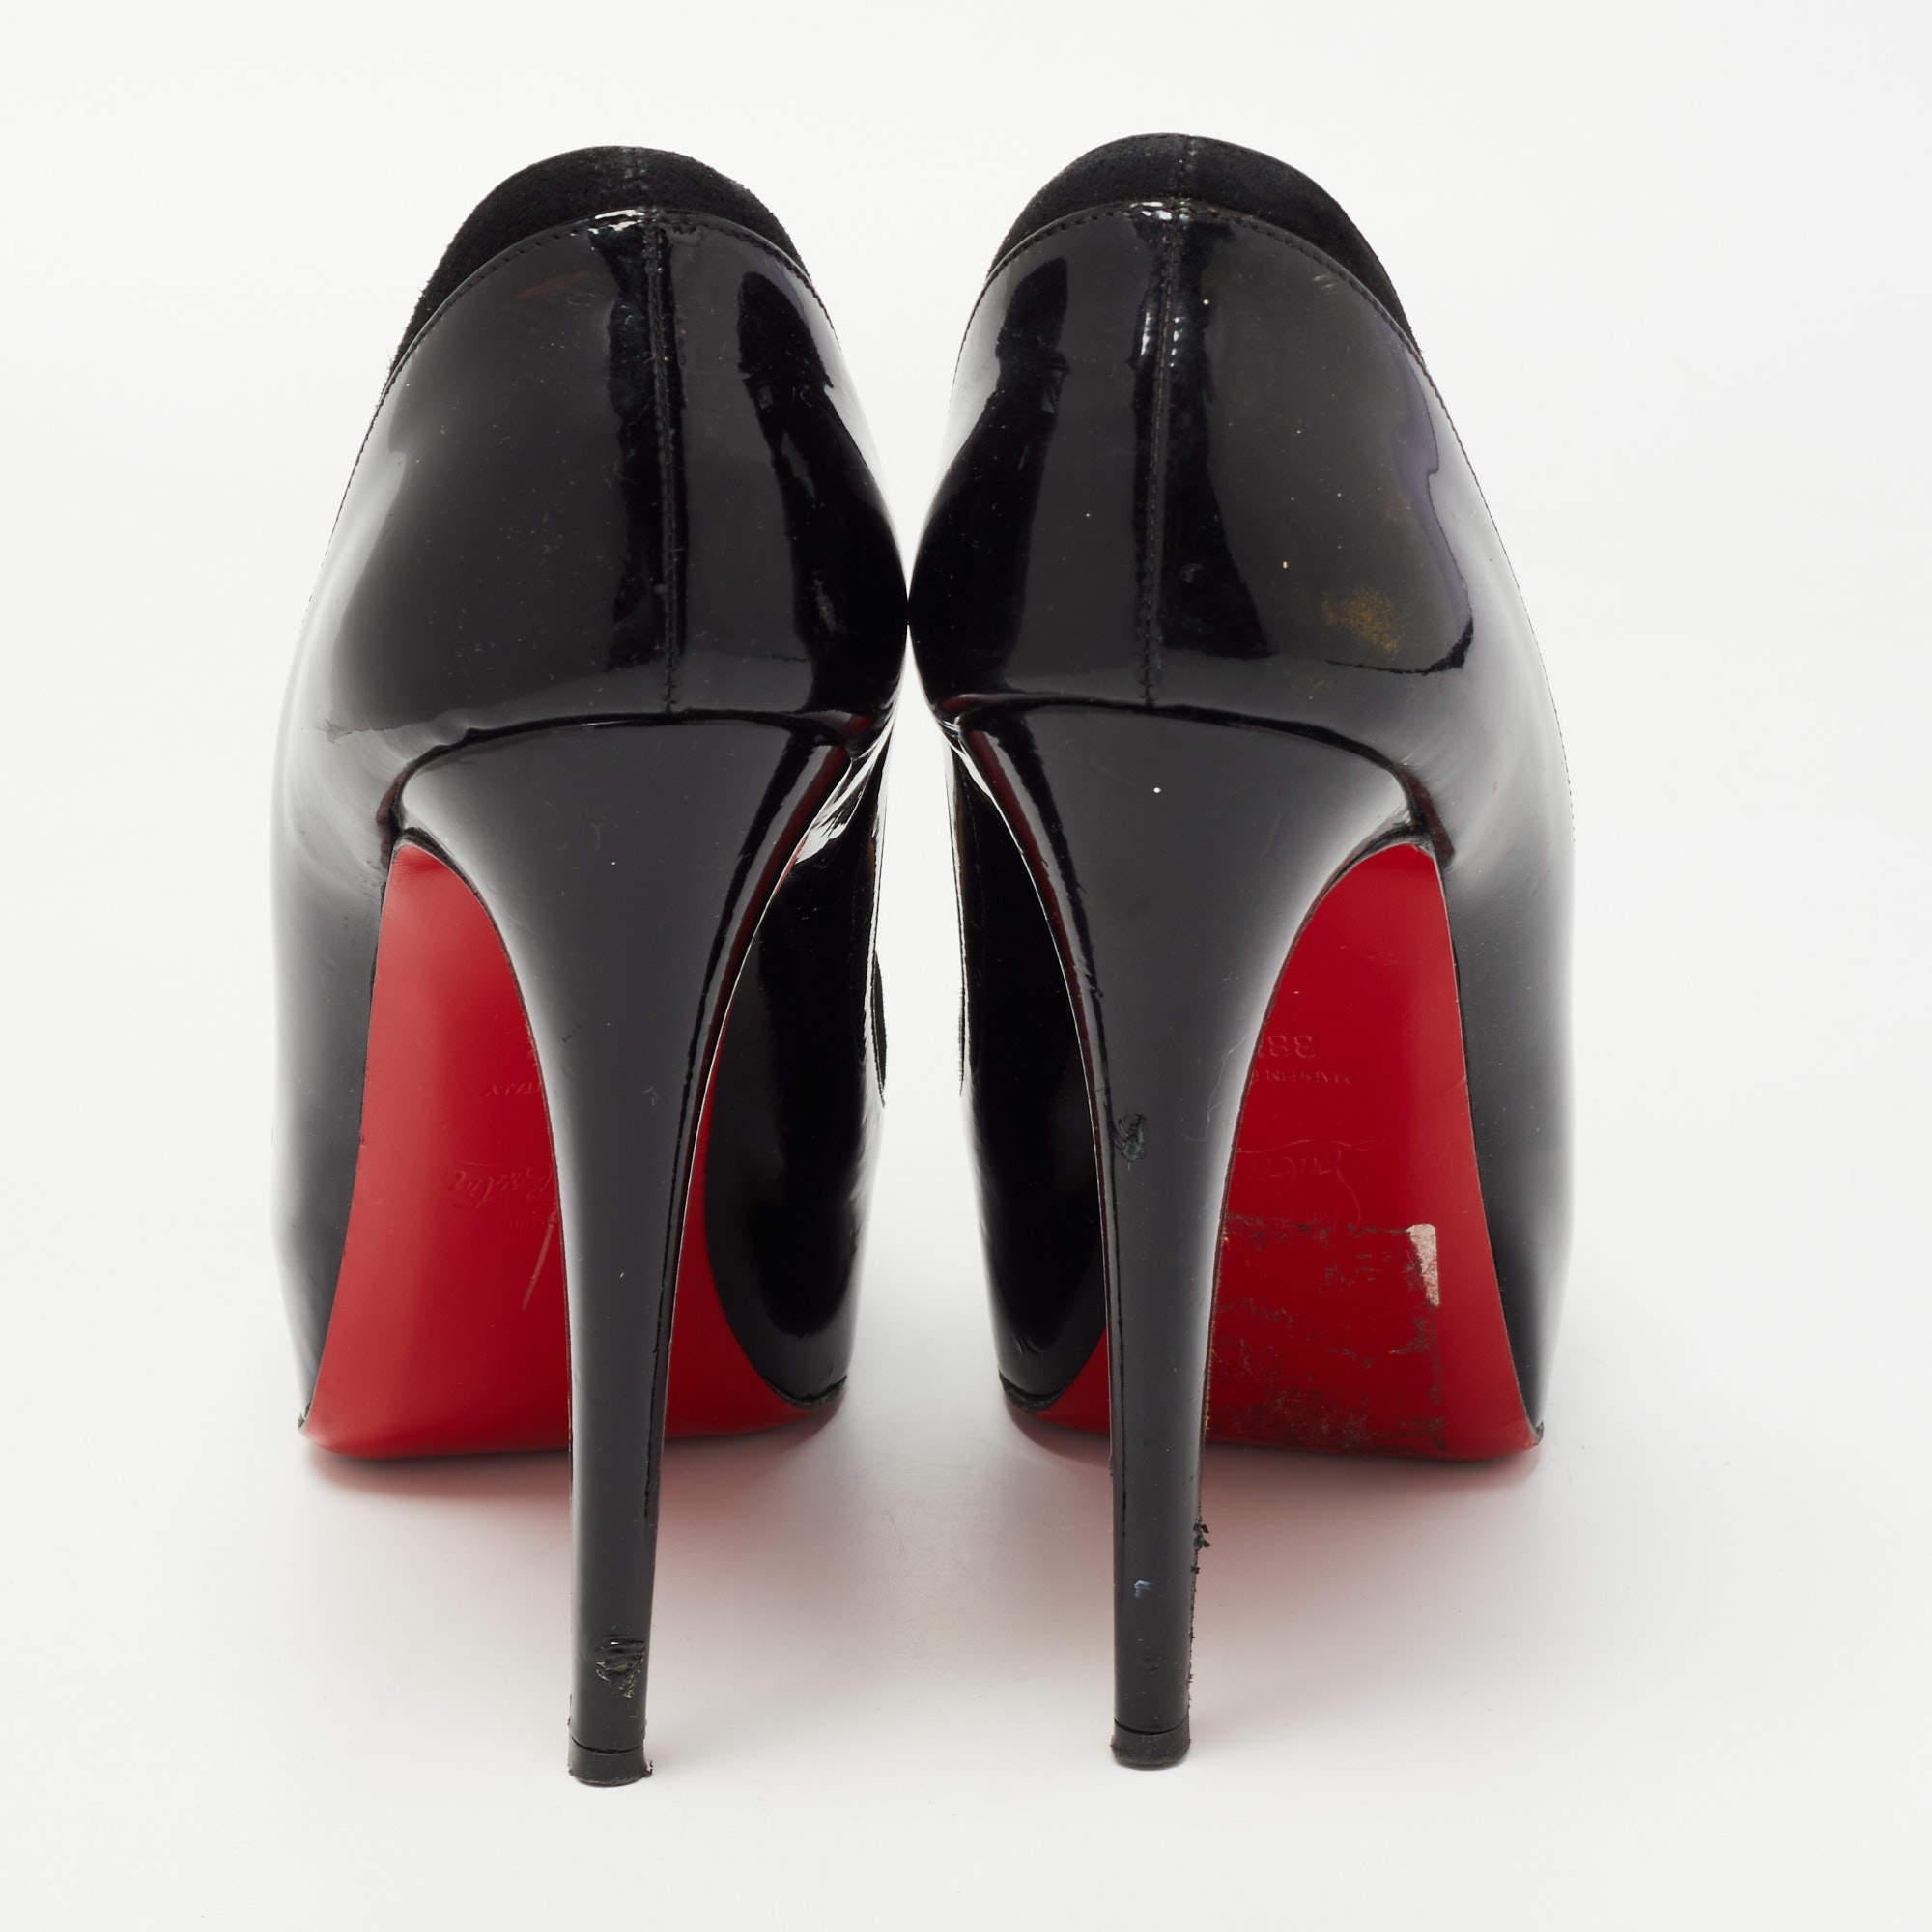 Christian Louboutin Black Patent and Suede Asteroid Pumps Size 38.5 In Good Condition For Sale In Dubai, Al Qouz 2